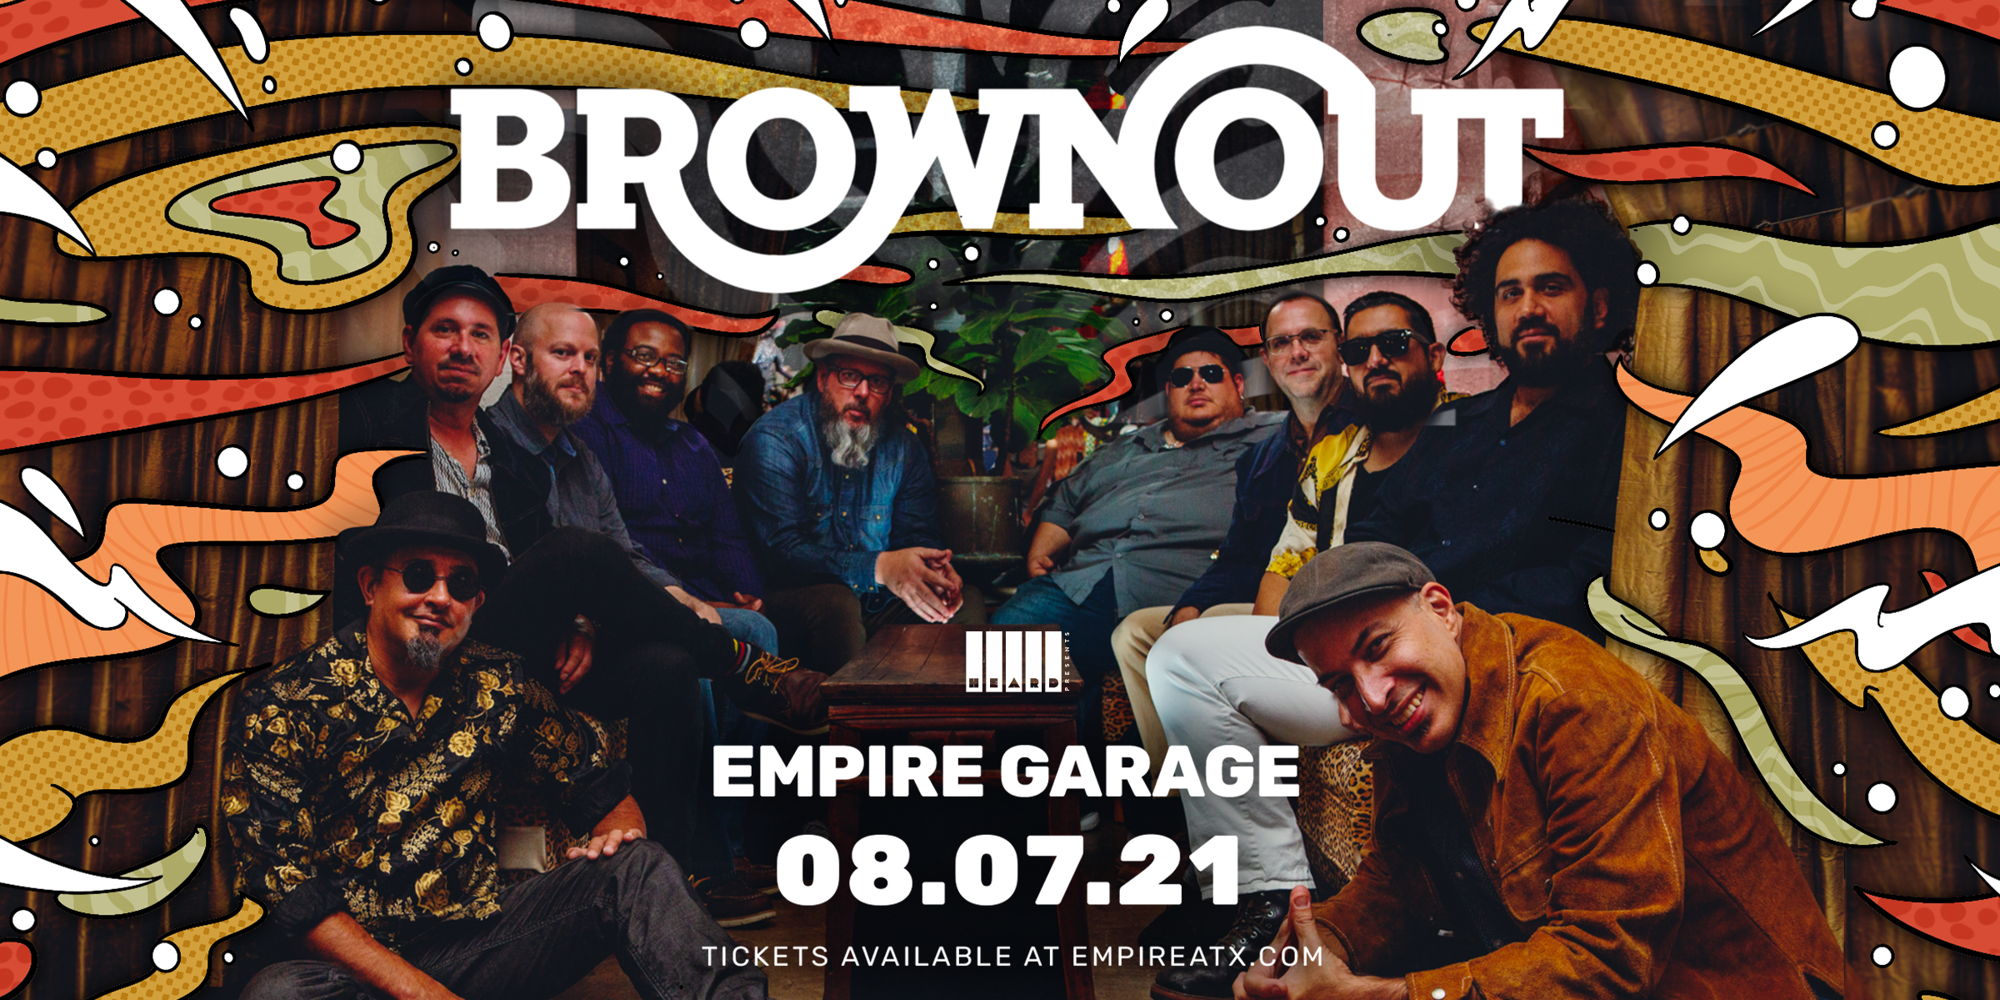 Brownout at Empire Garage 8/7 promotional image